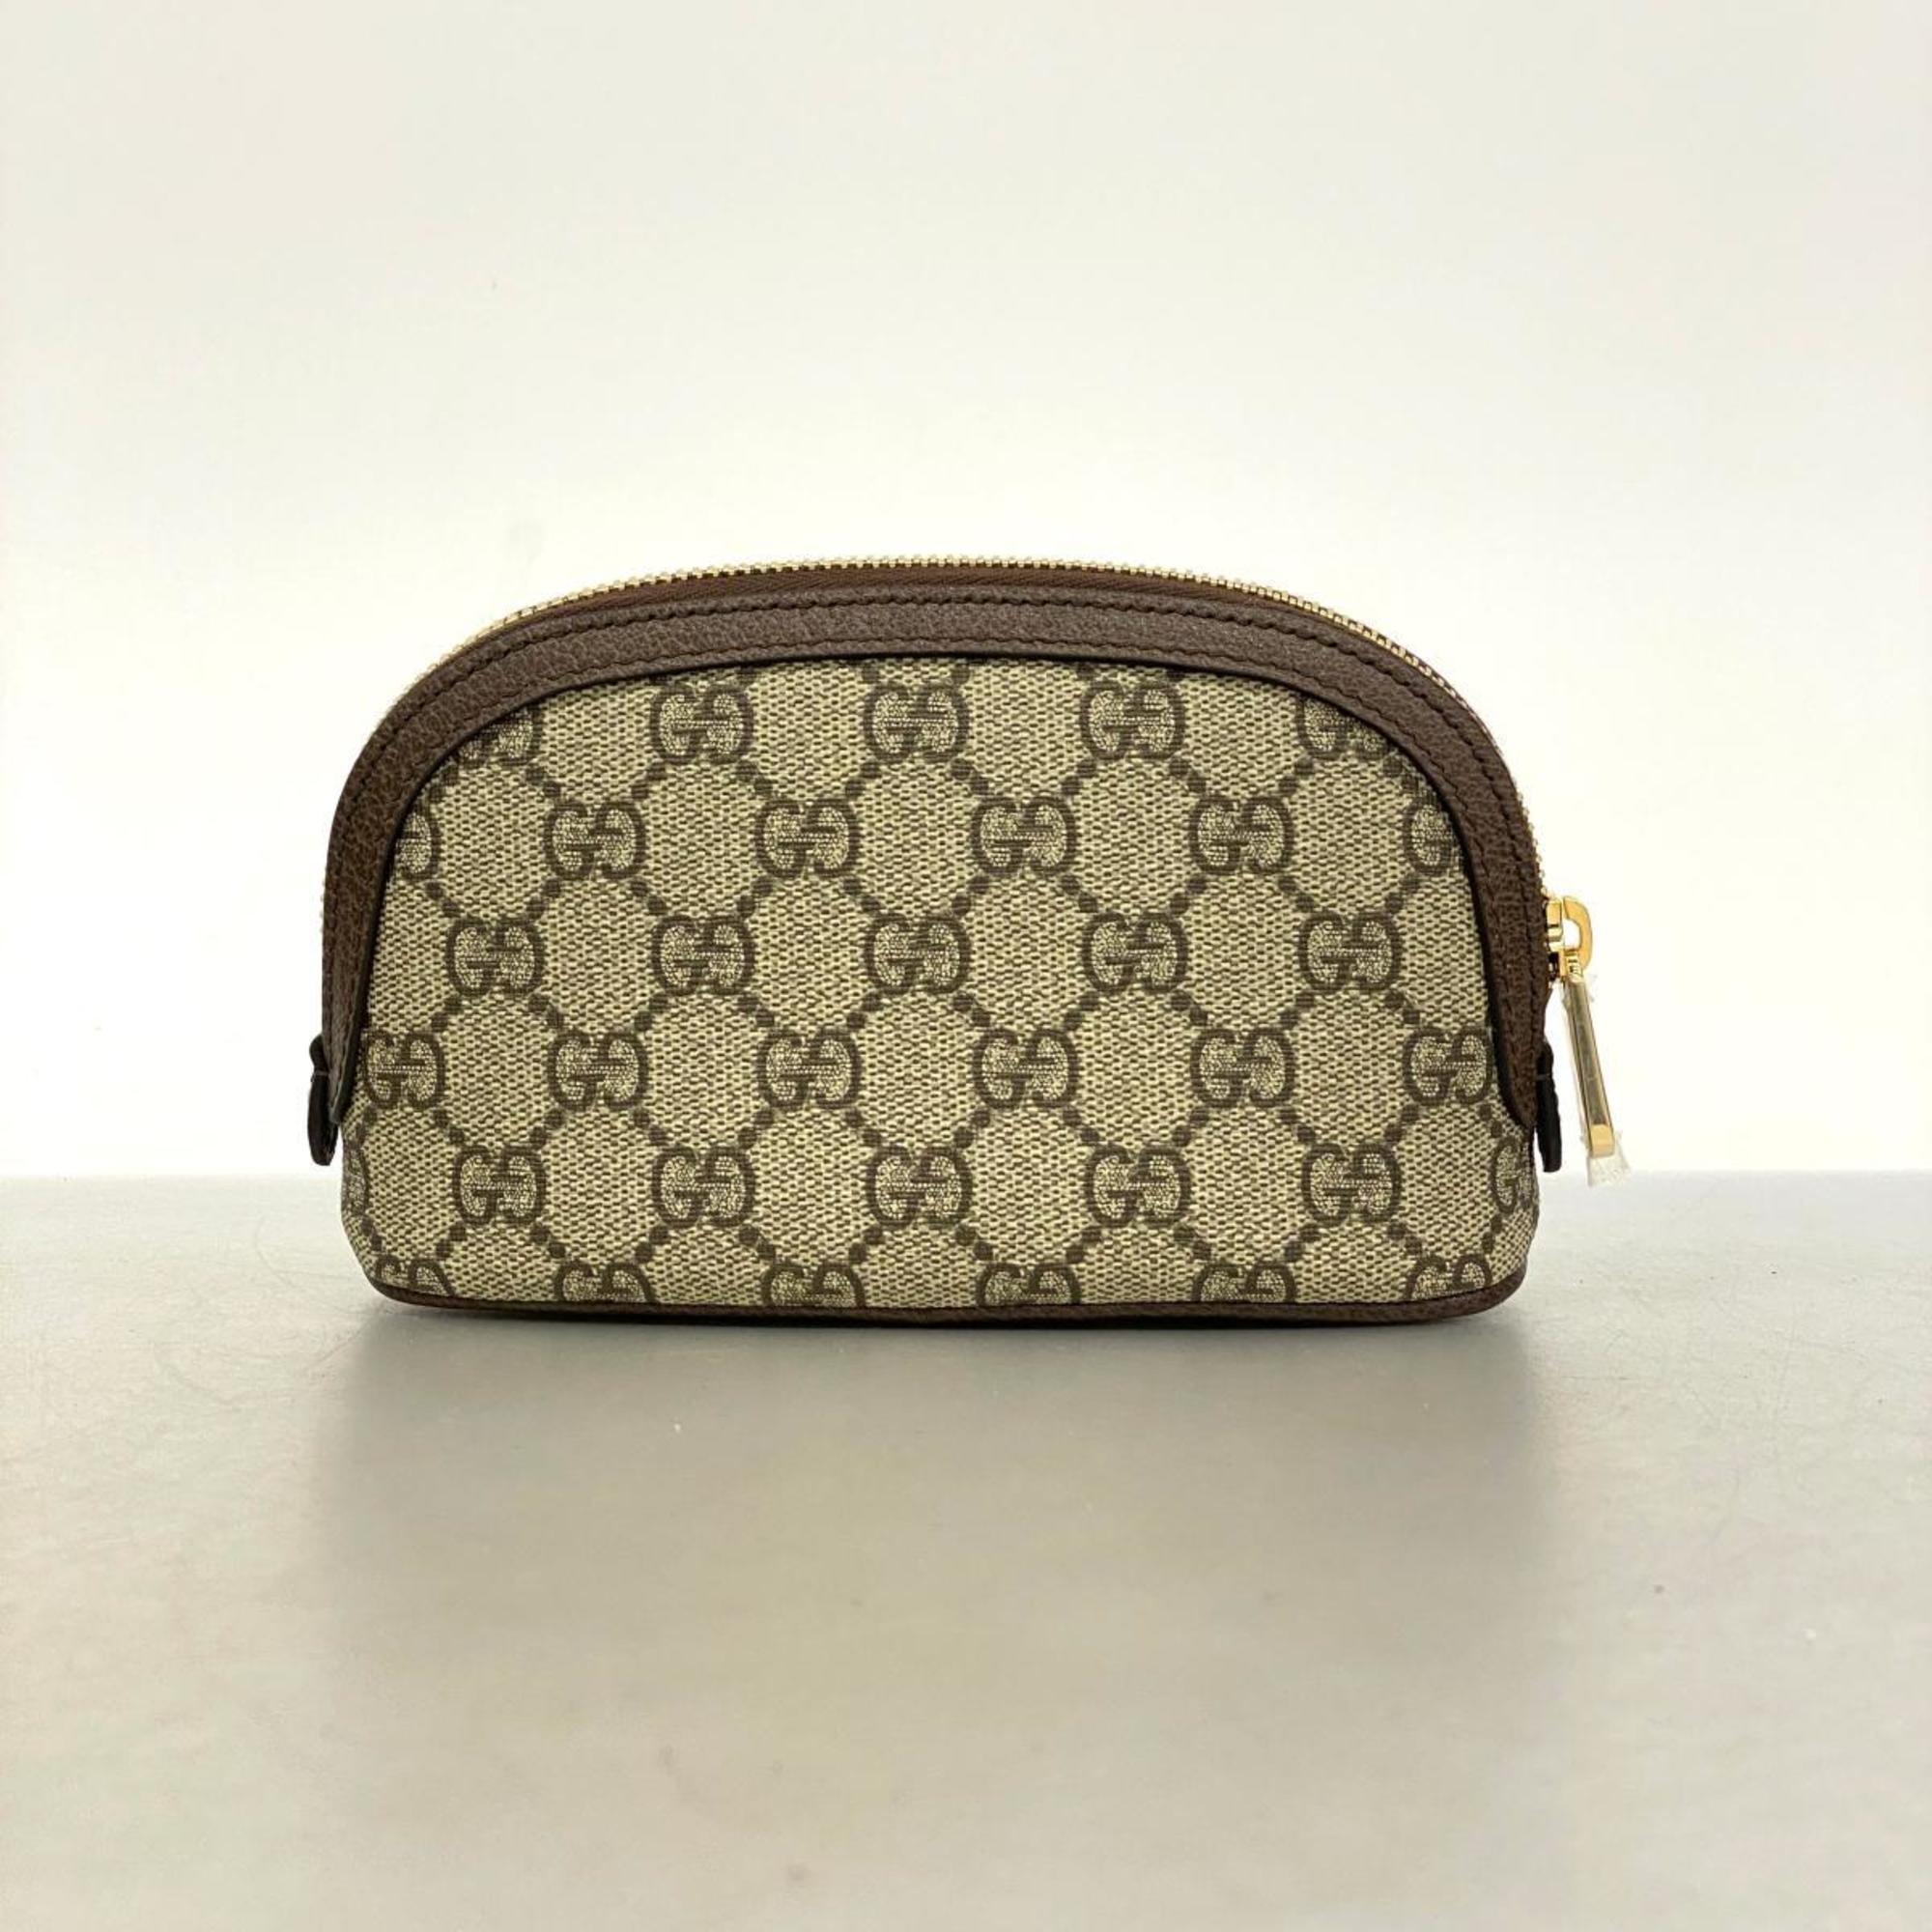 Gucci Ophidia Pouch 625550 Leather Brown Women's